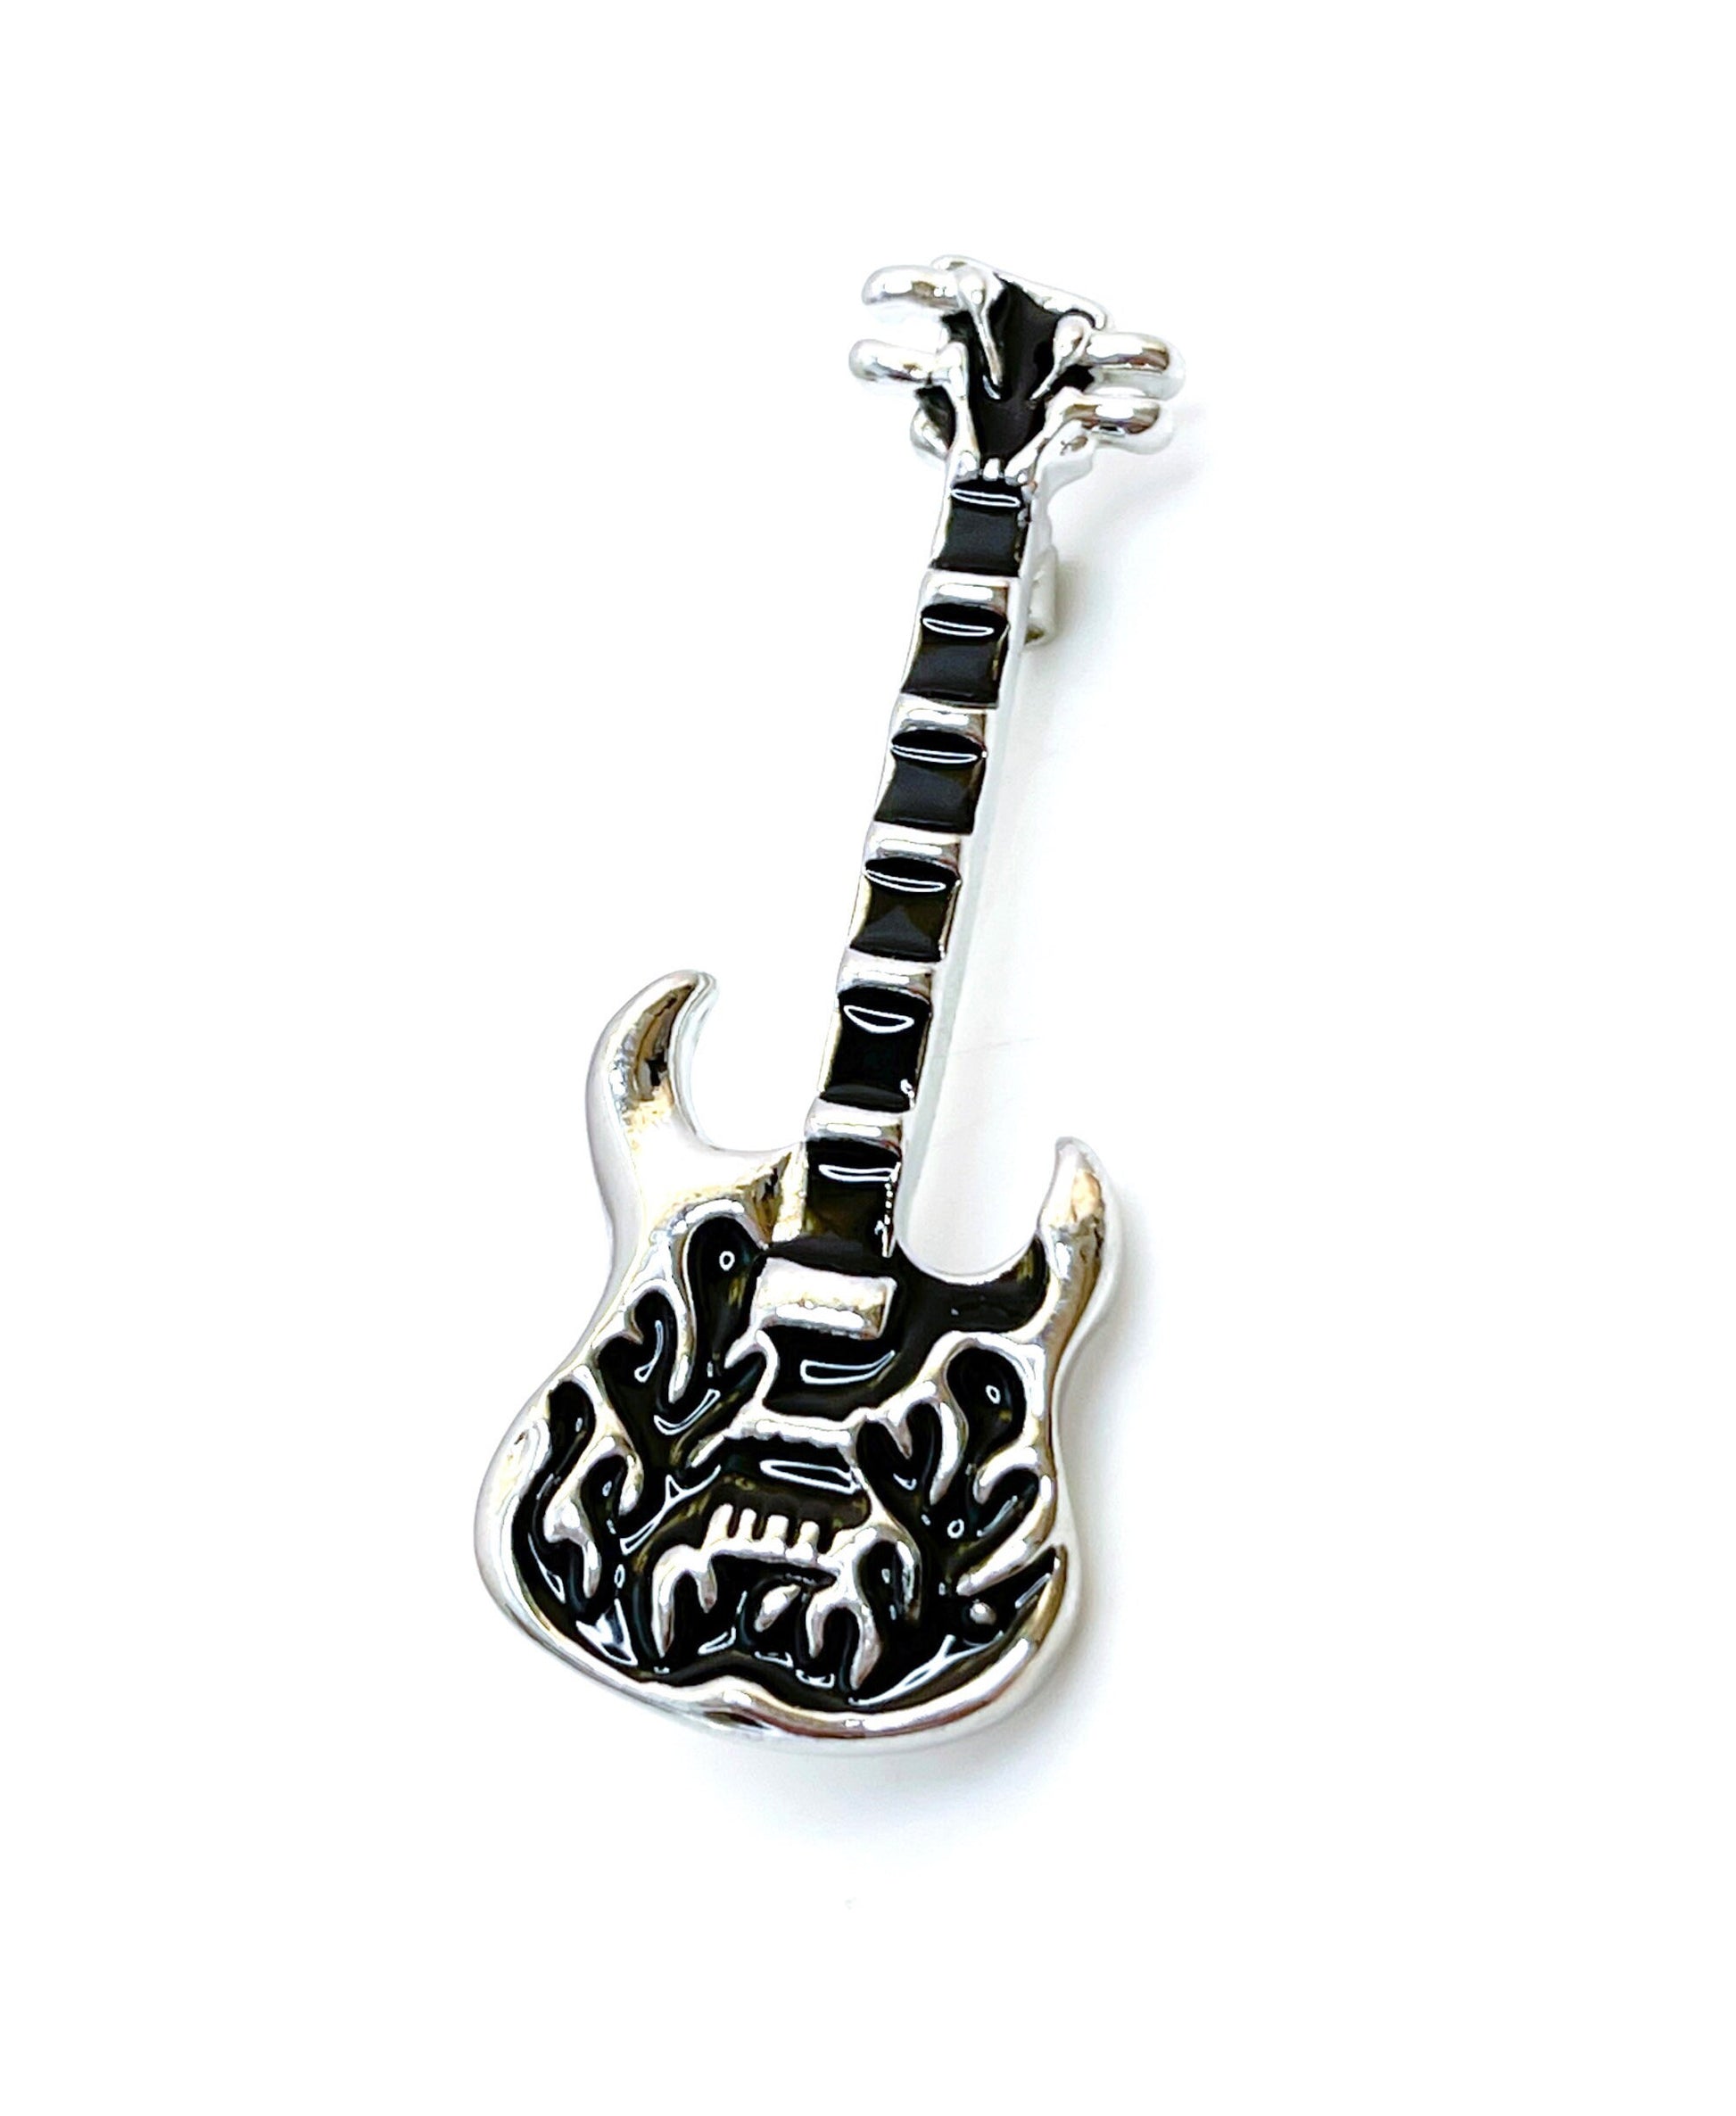 Black Silver Flame Guitar Brooch | Unisex Music Lovers Gift